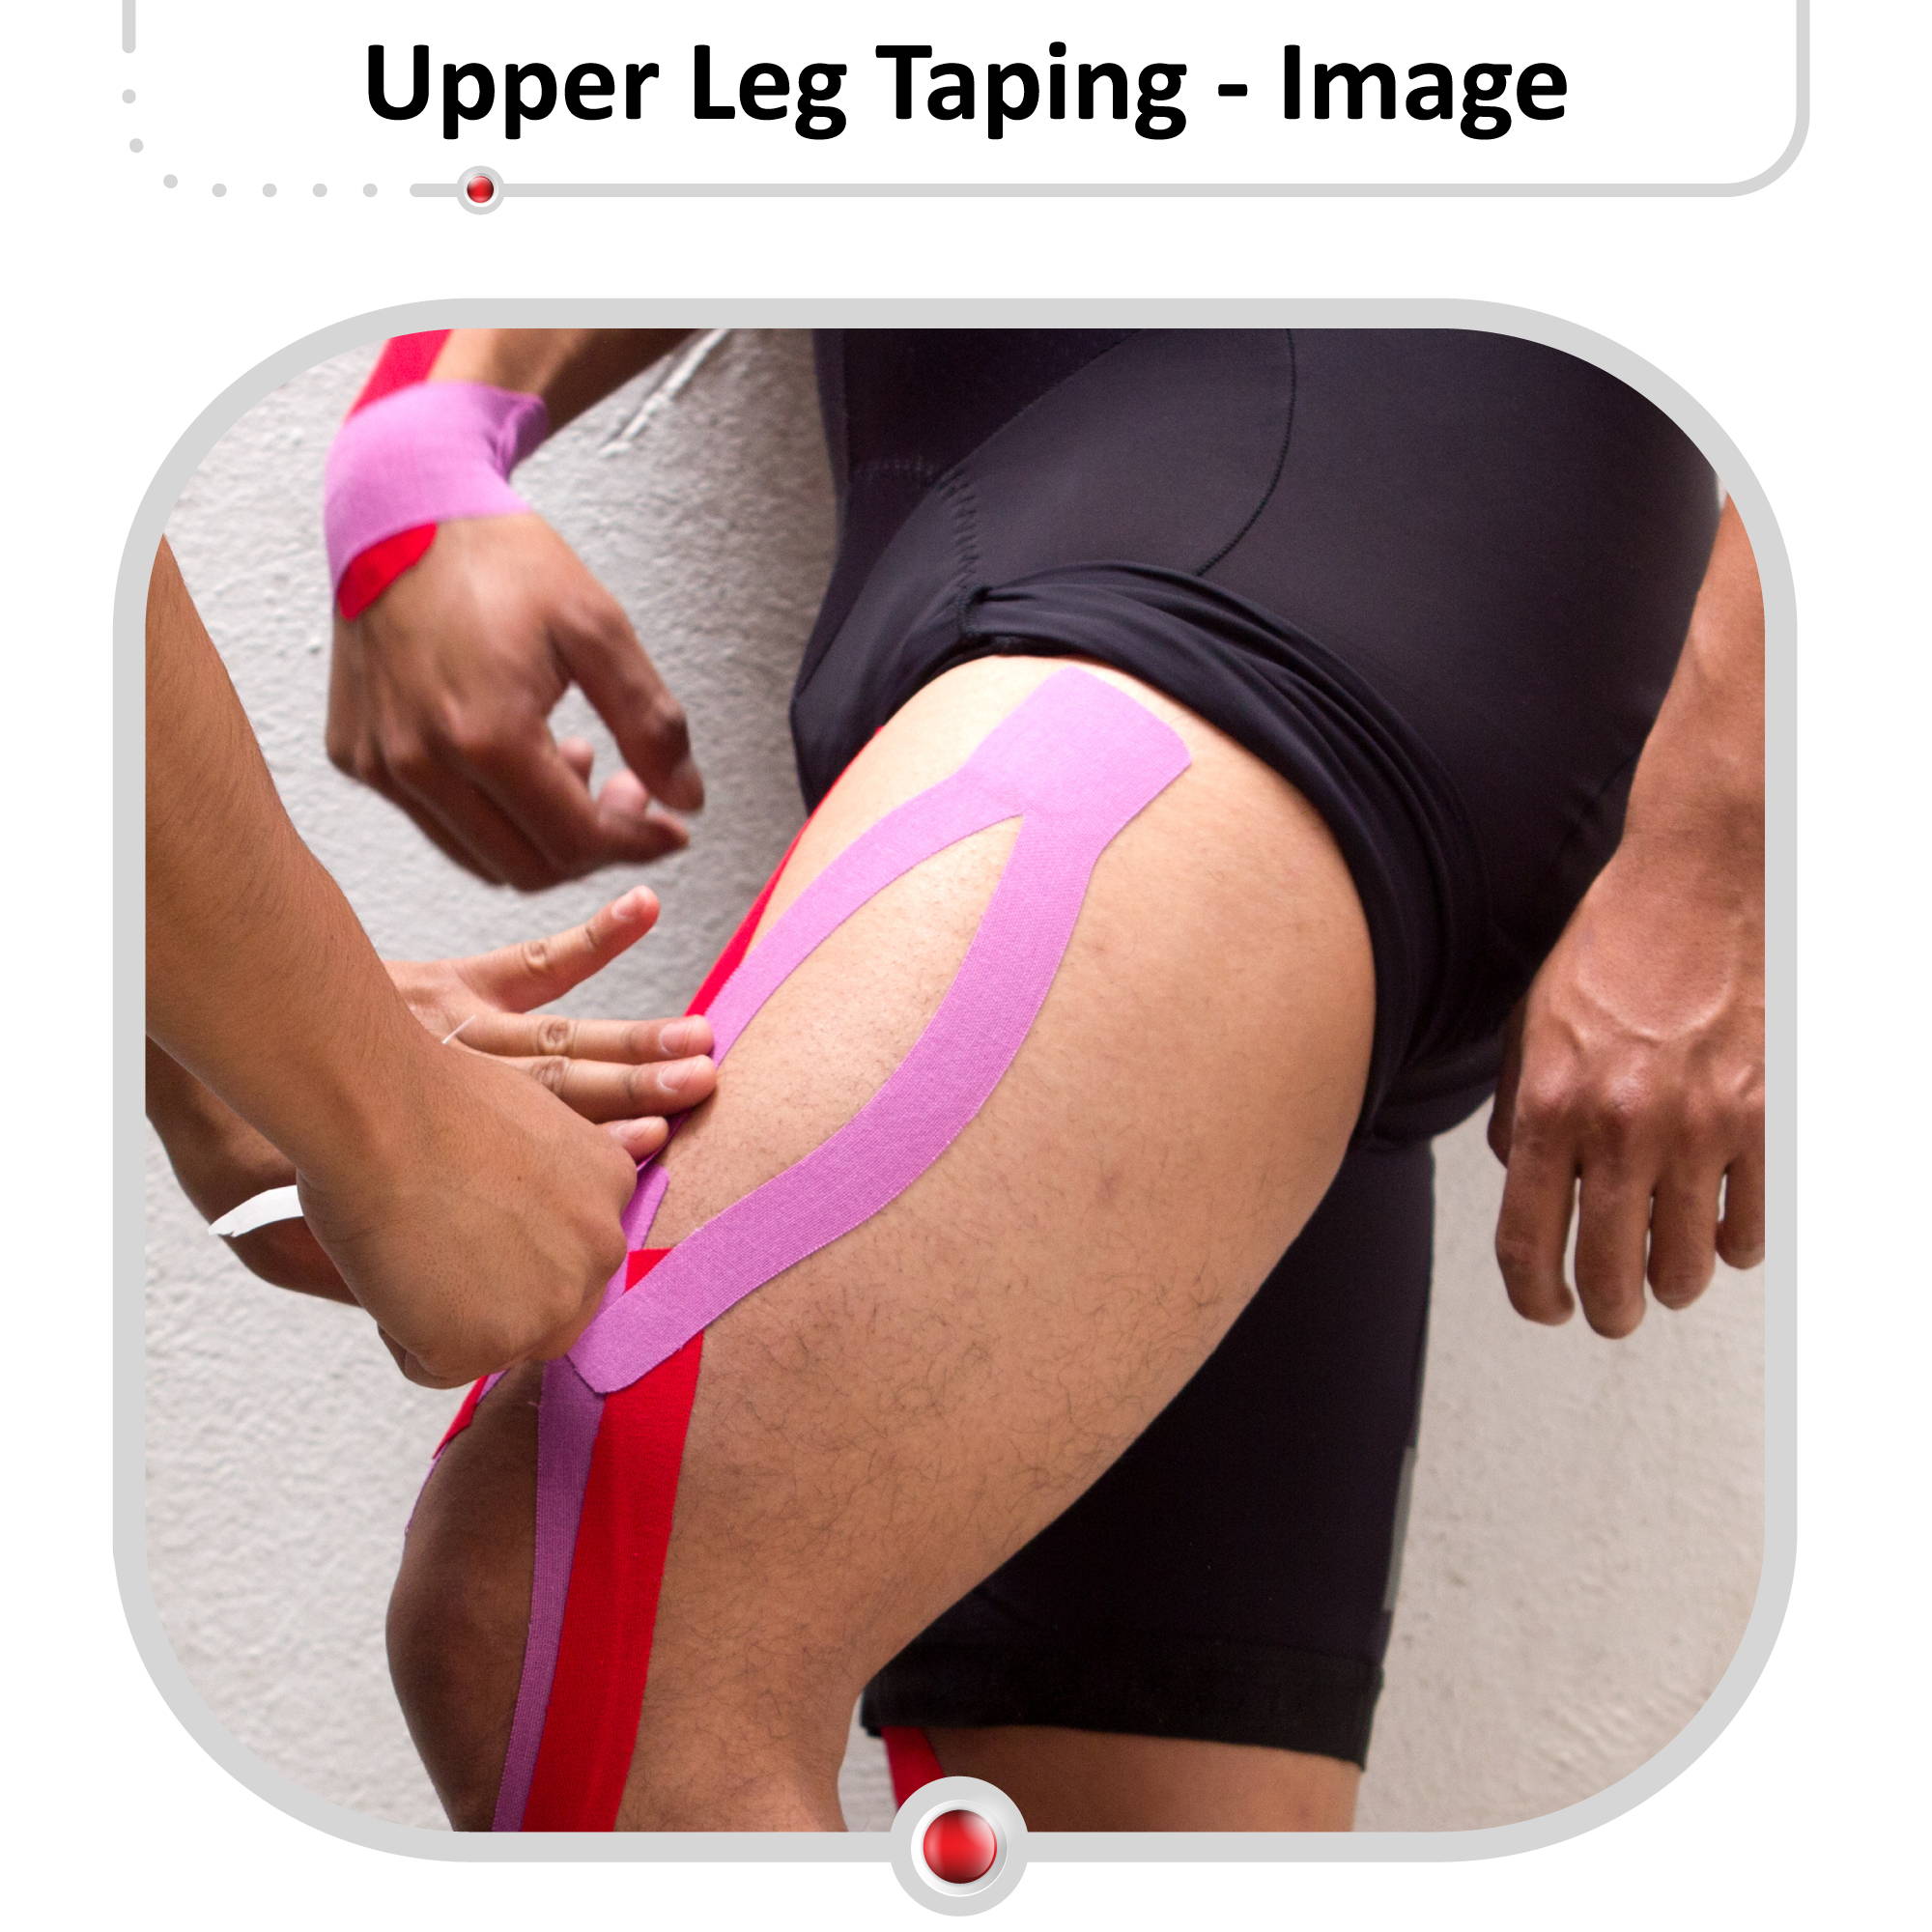 Kinesiology Taping For Pregnancy, WODdoc, P365